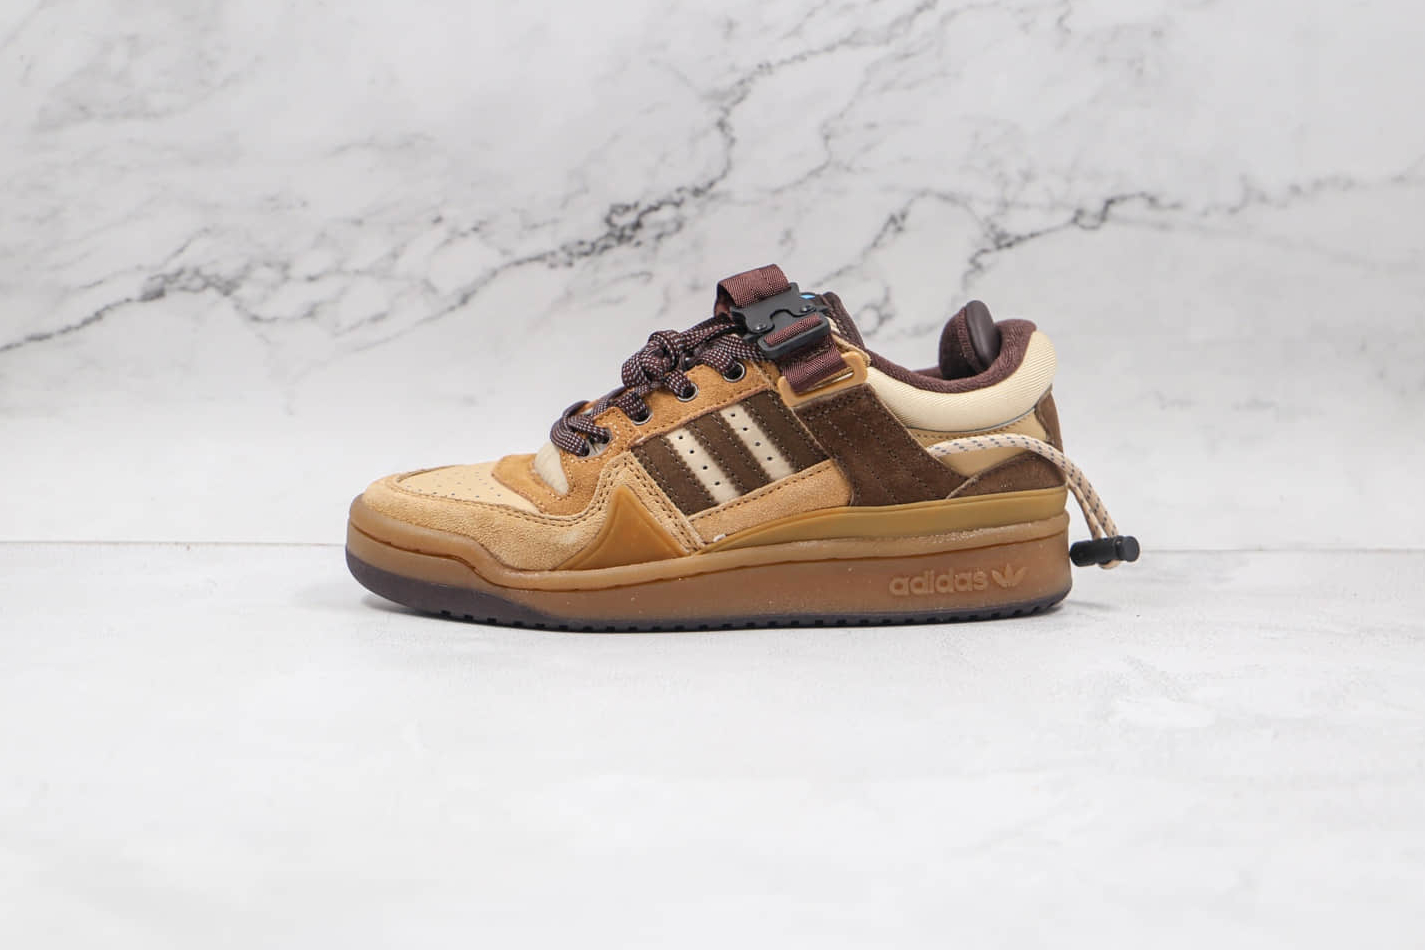 Adidas Bad Bunny x Forum Buckle Low 'The First Cafe' GW0264 - Limited Edition Collaboration Sneakers